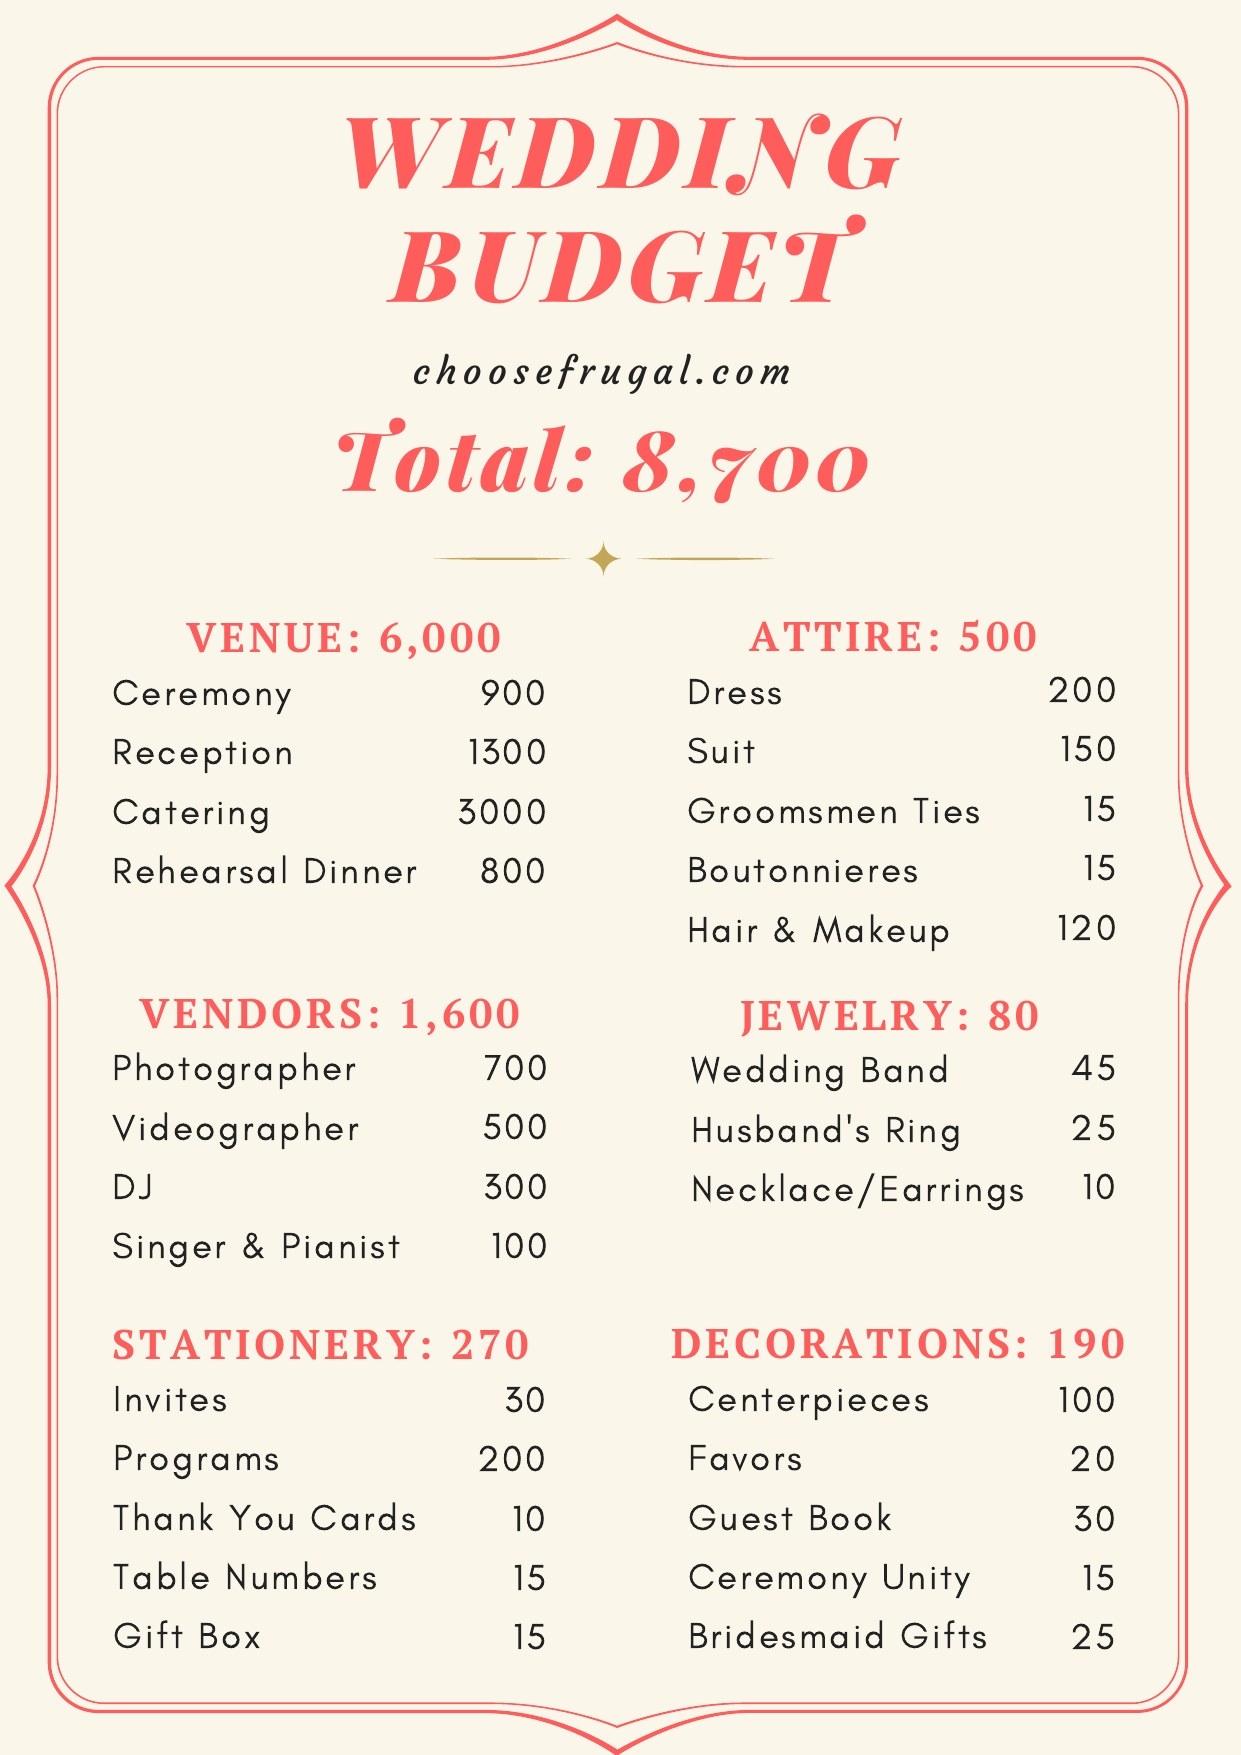 How I Planned A Wedding Under $10,000